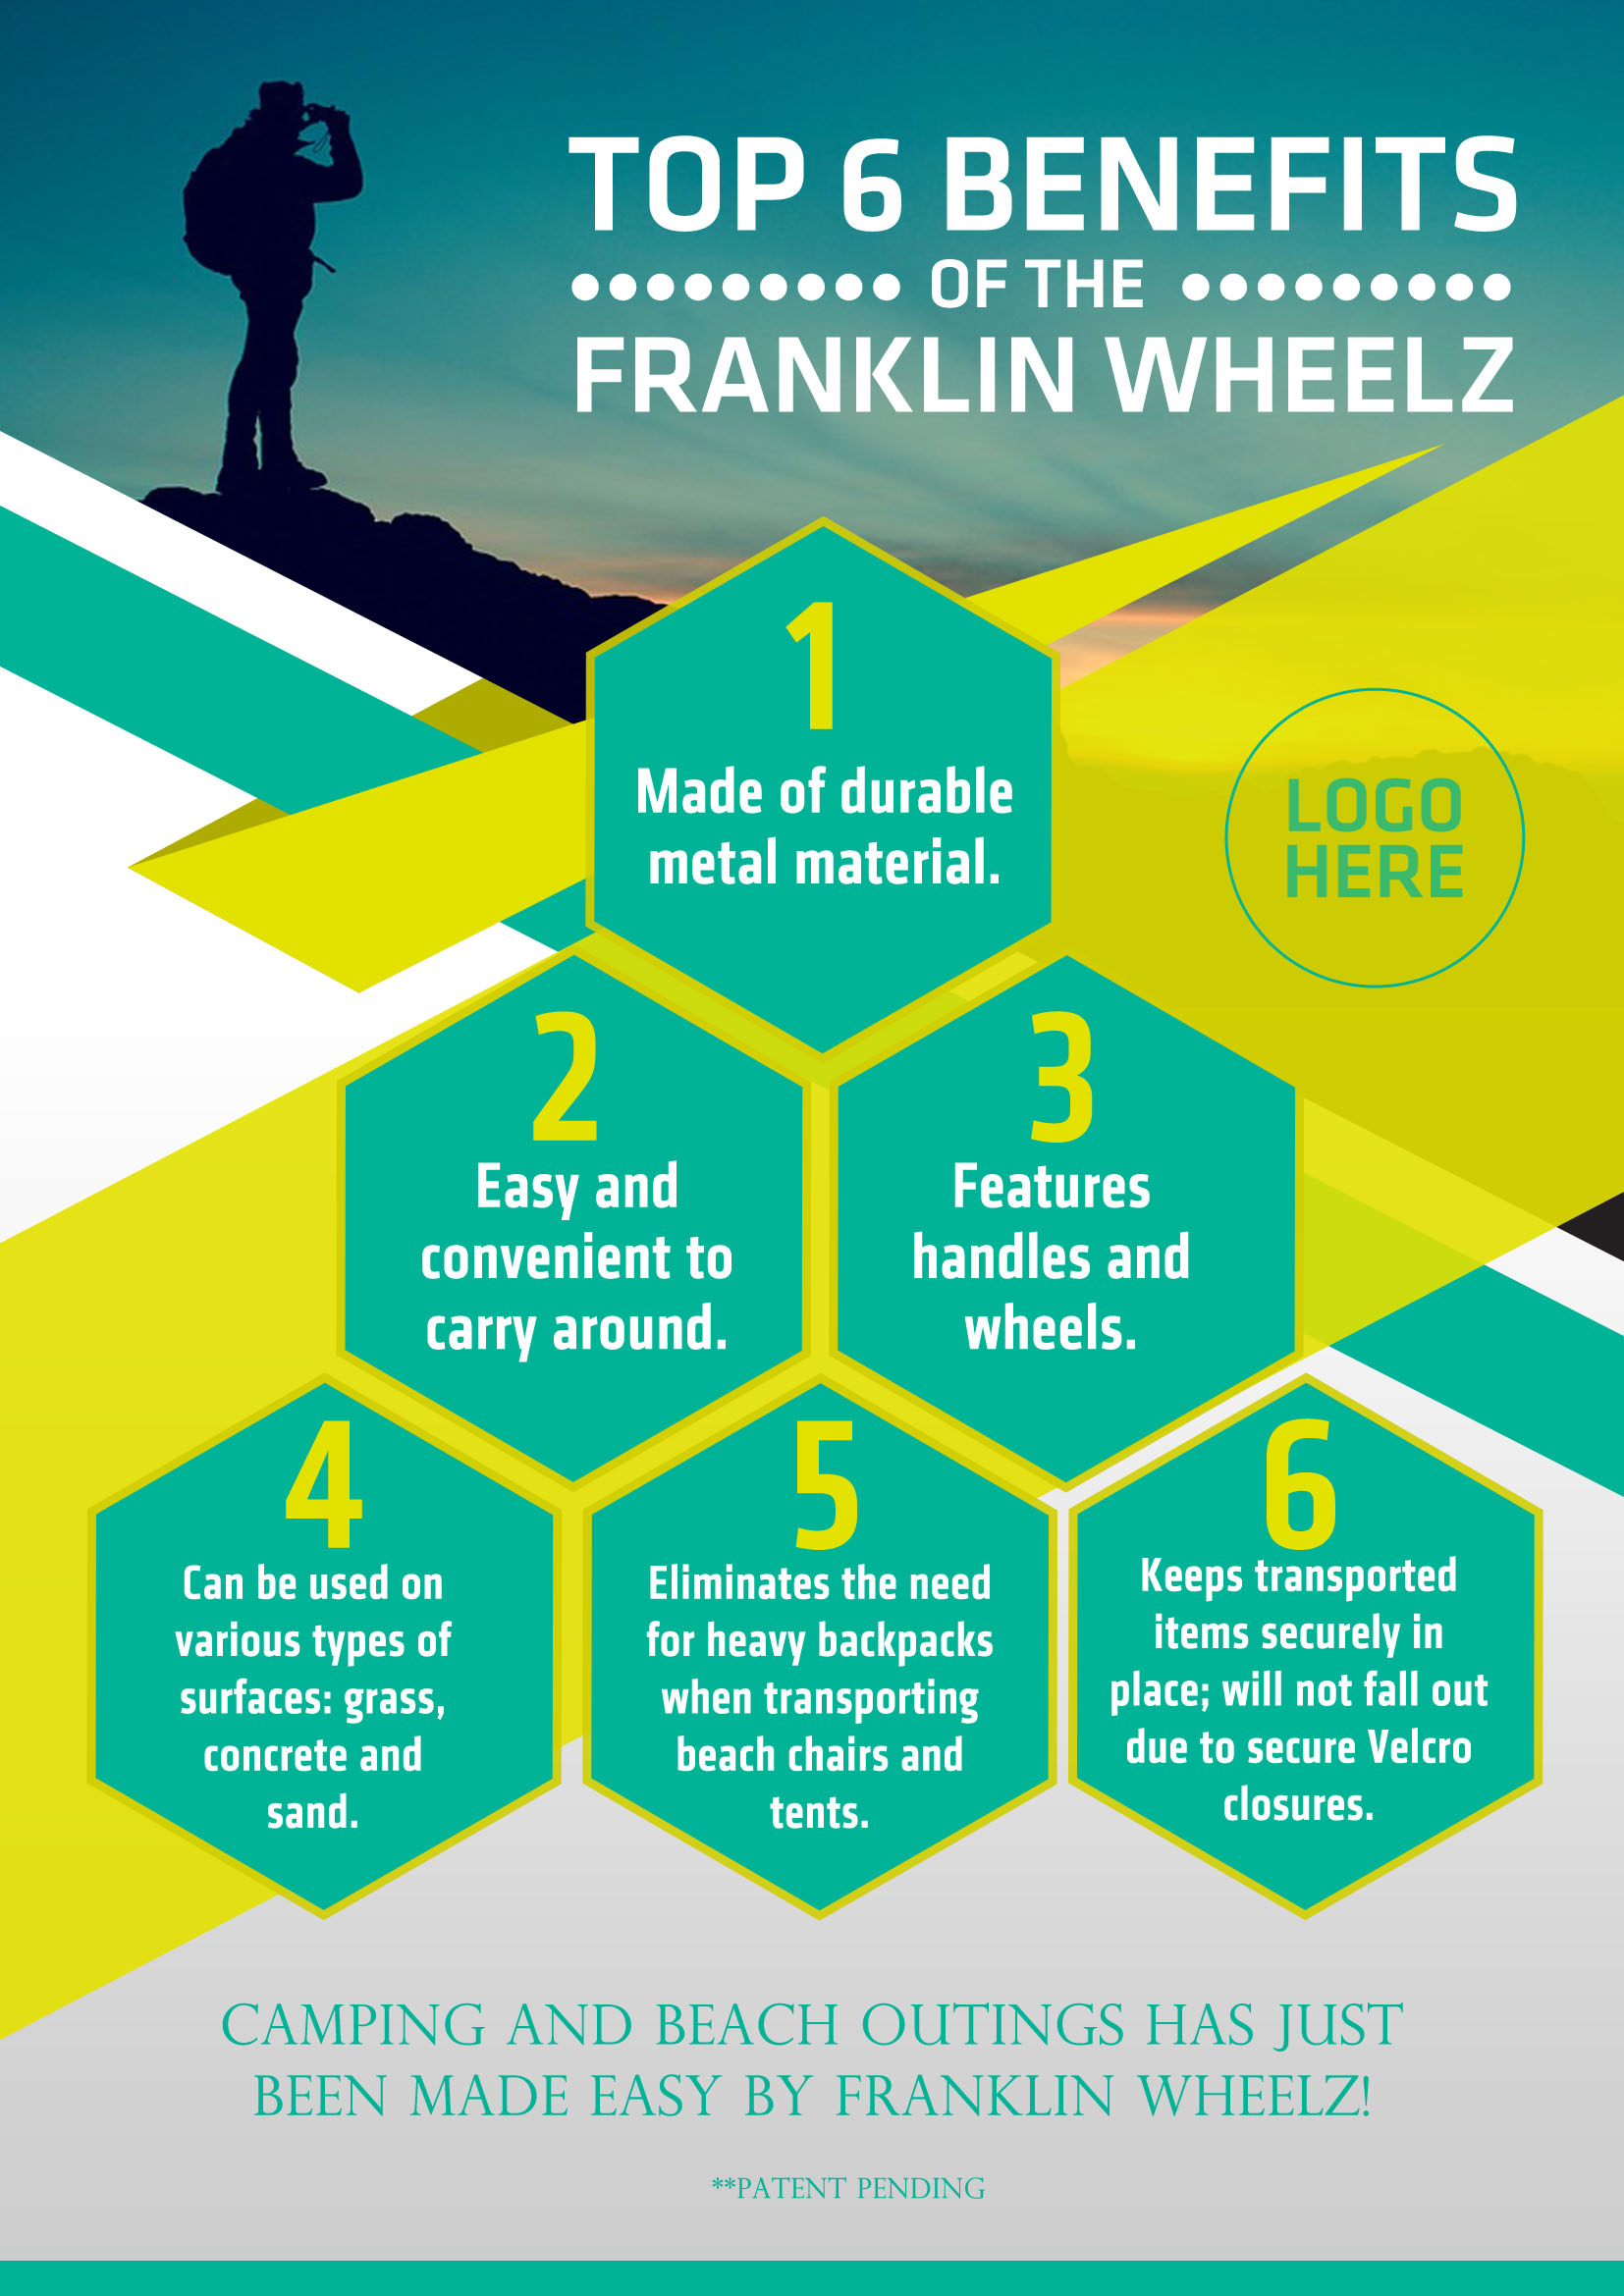 With the aid of the Franklin Wheel, I can now simply put all my heavier and bulkier items in. I can now distribute the weight I carry with ease